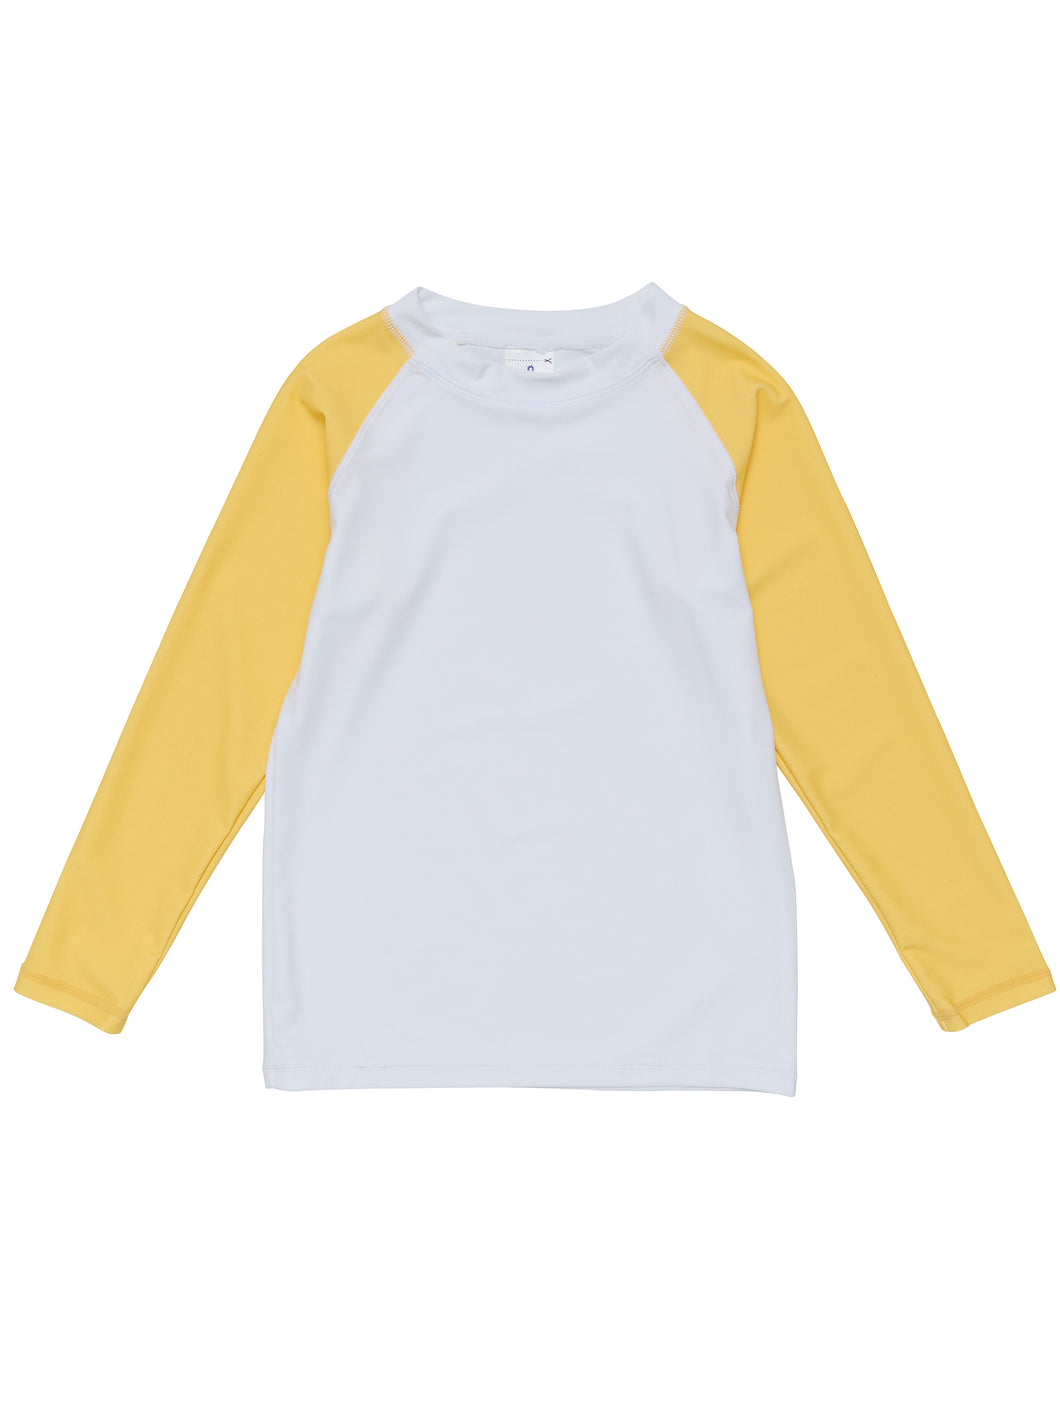 Sustainable Long Sleeve Rash Top in White with Yellow Sleeves